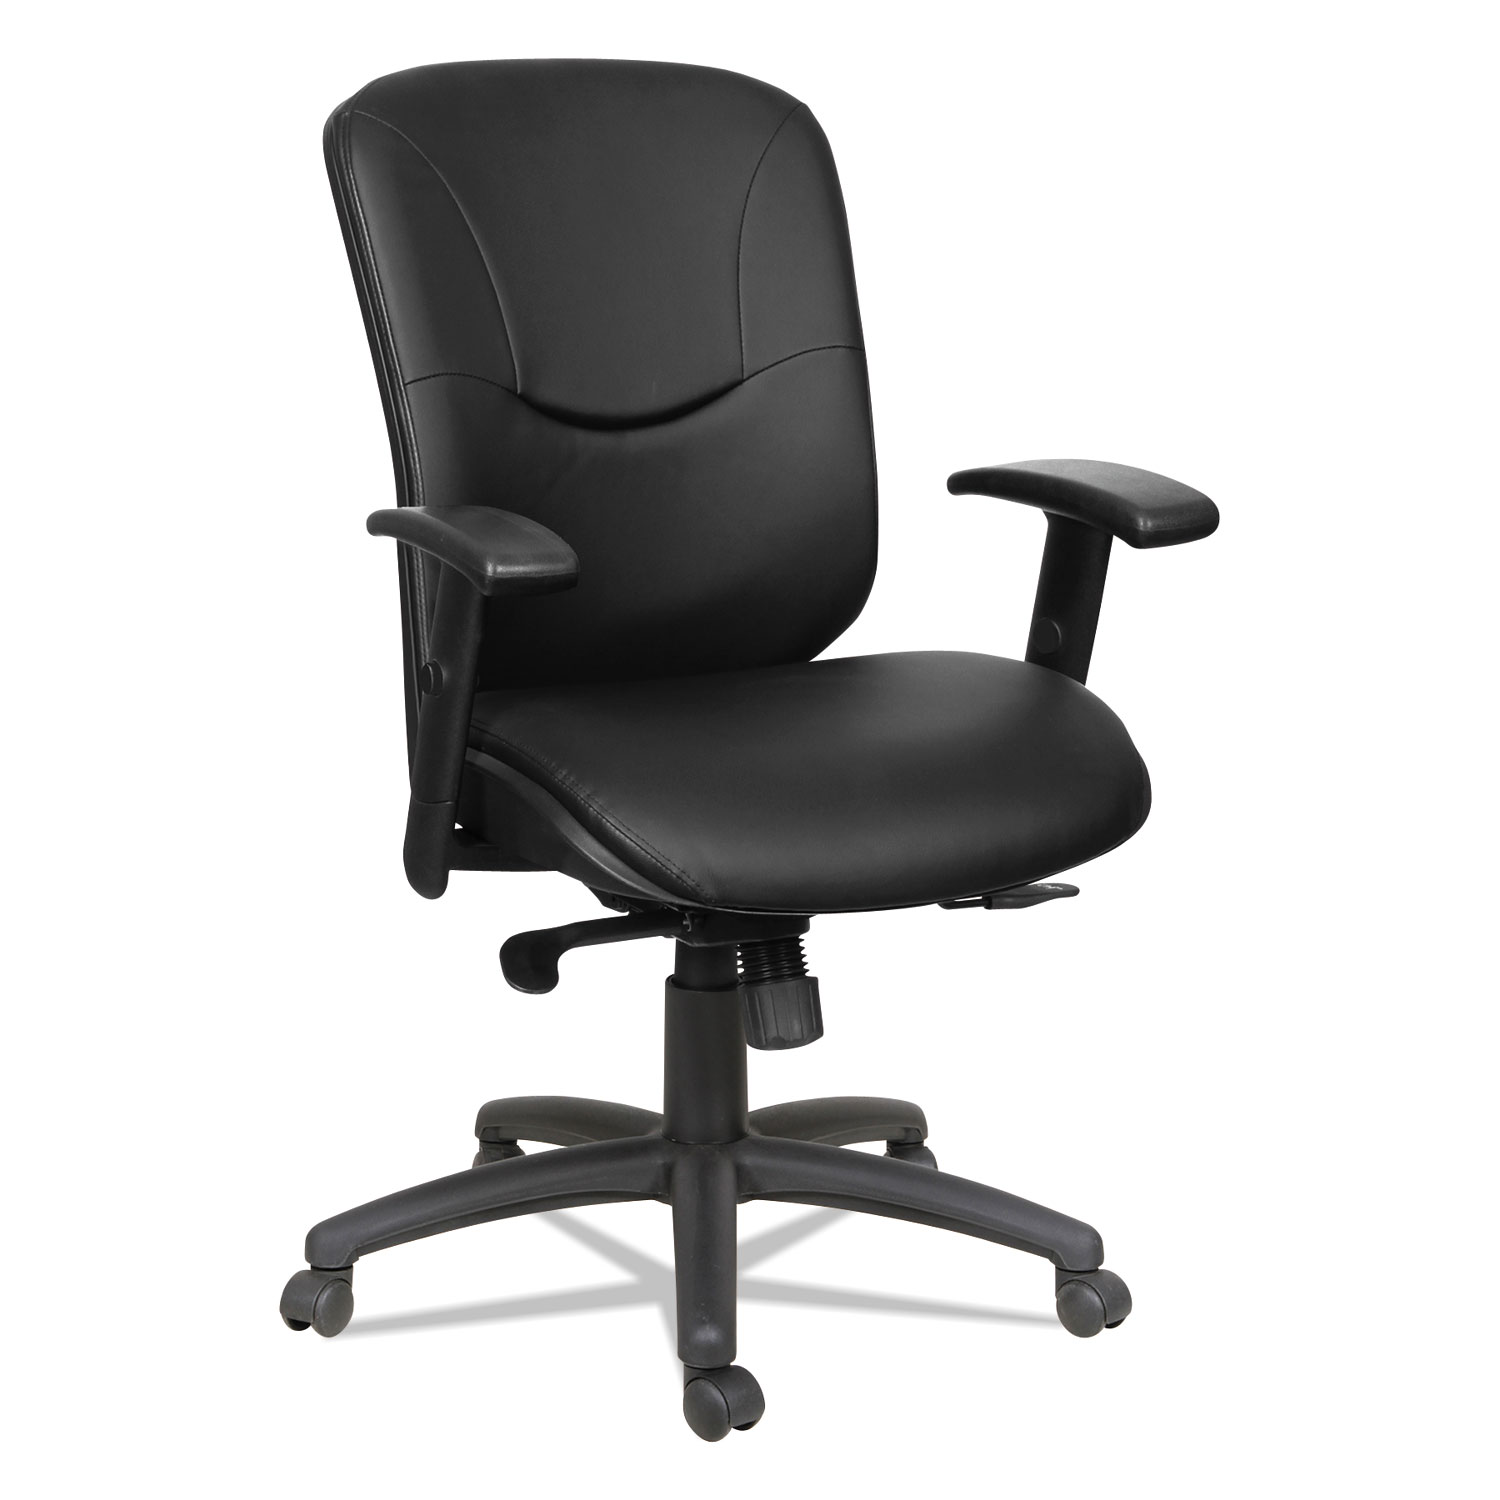  Alera ALEEN4219 Alera Eon Series Mid-Back Leather Synchro with Seat Slide Chair, Supports up to 275 lbs., Black Seat/Black Back, Black Base (ALEEN4219) 